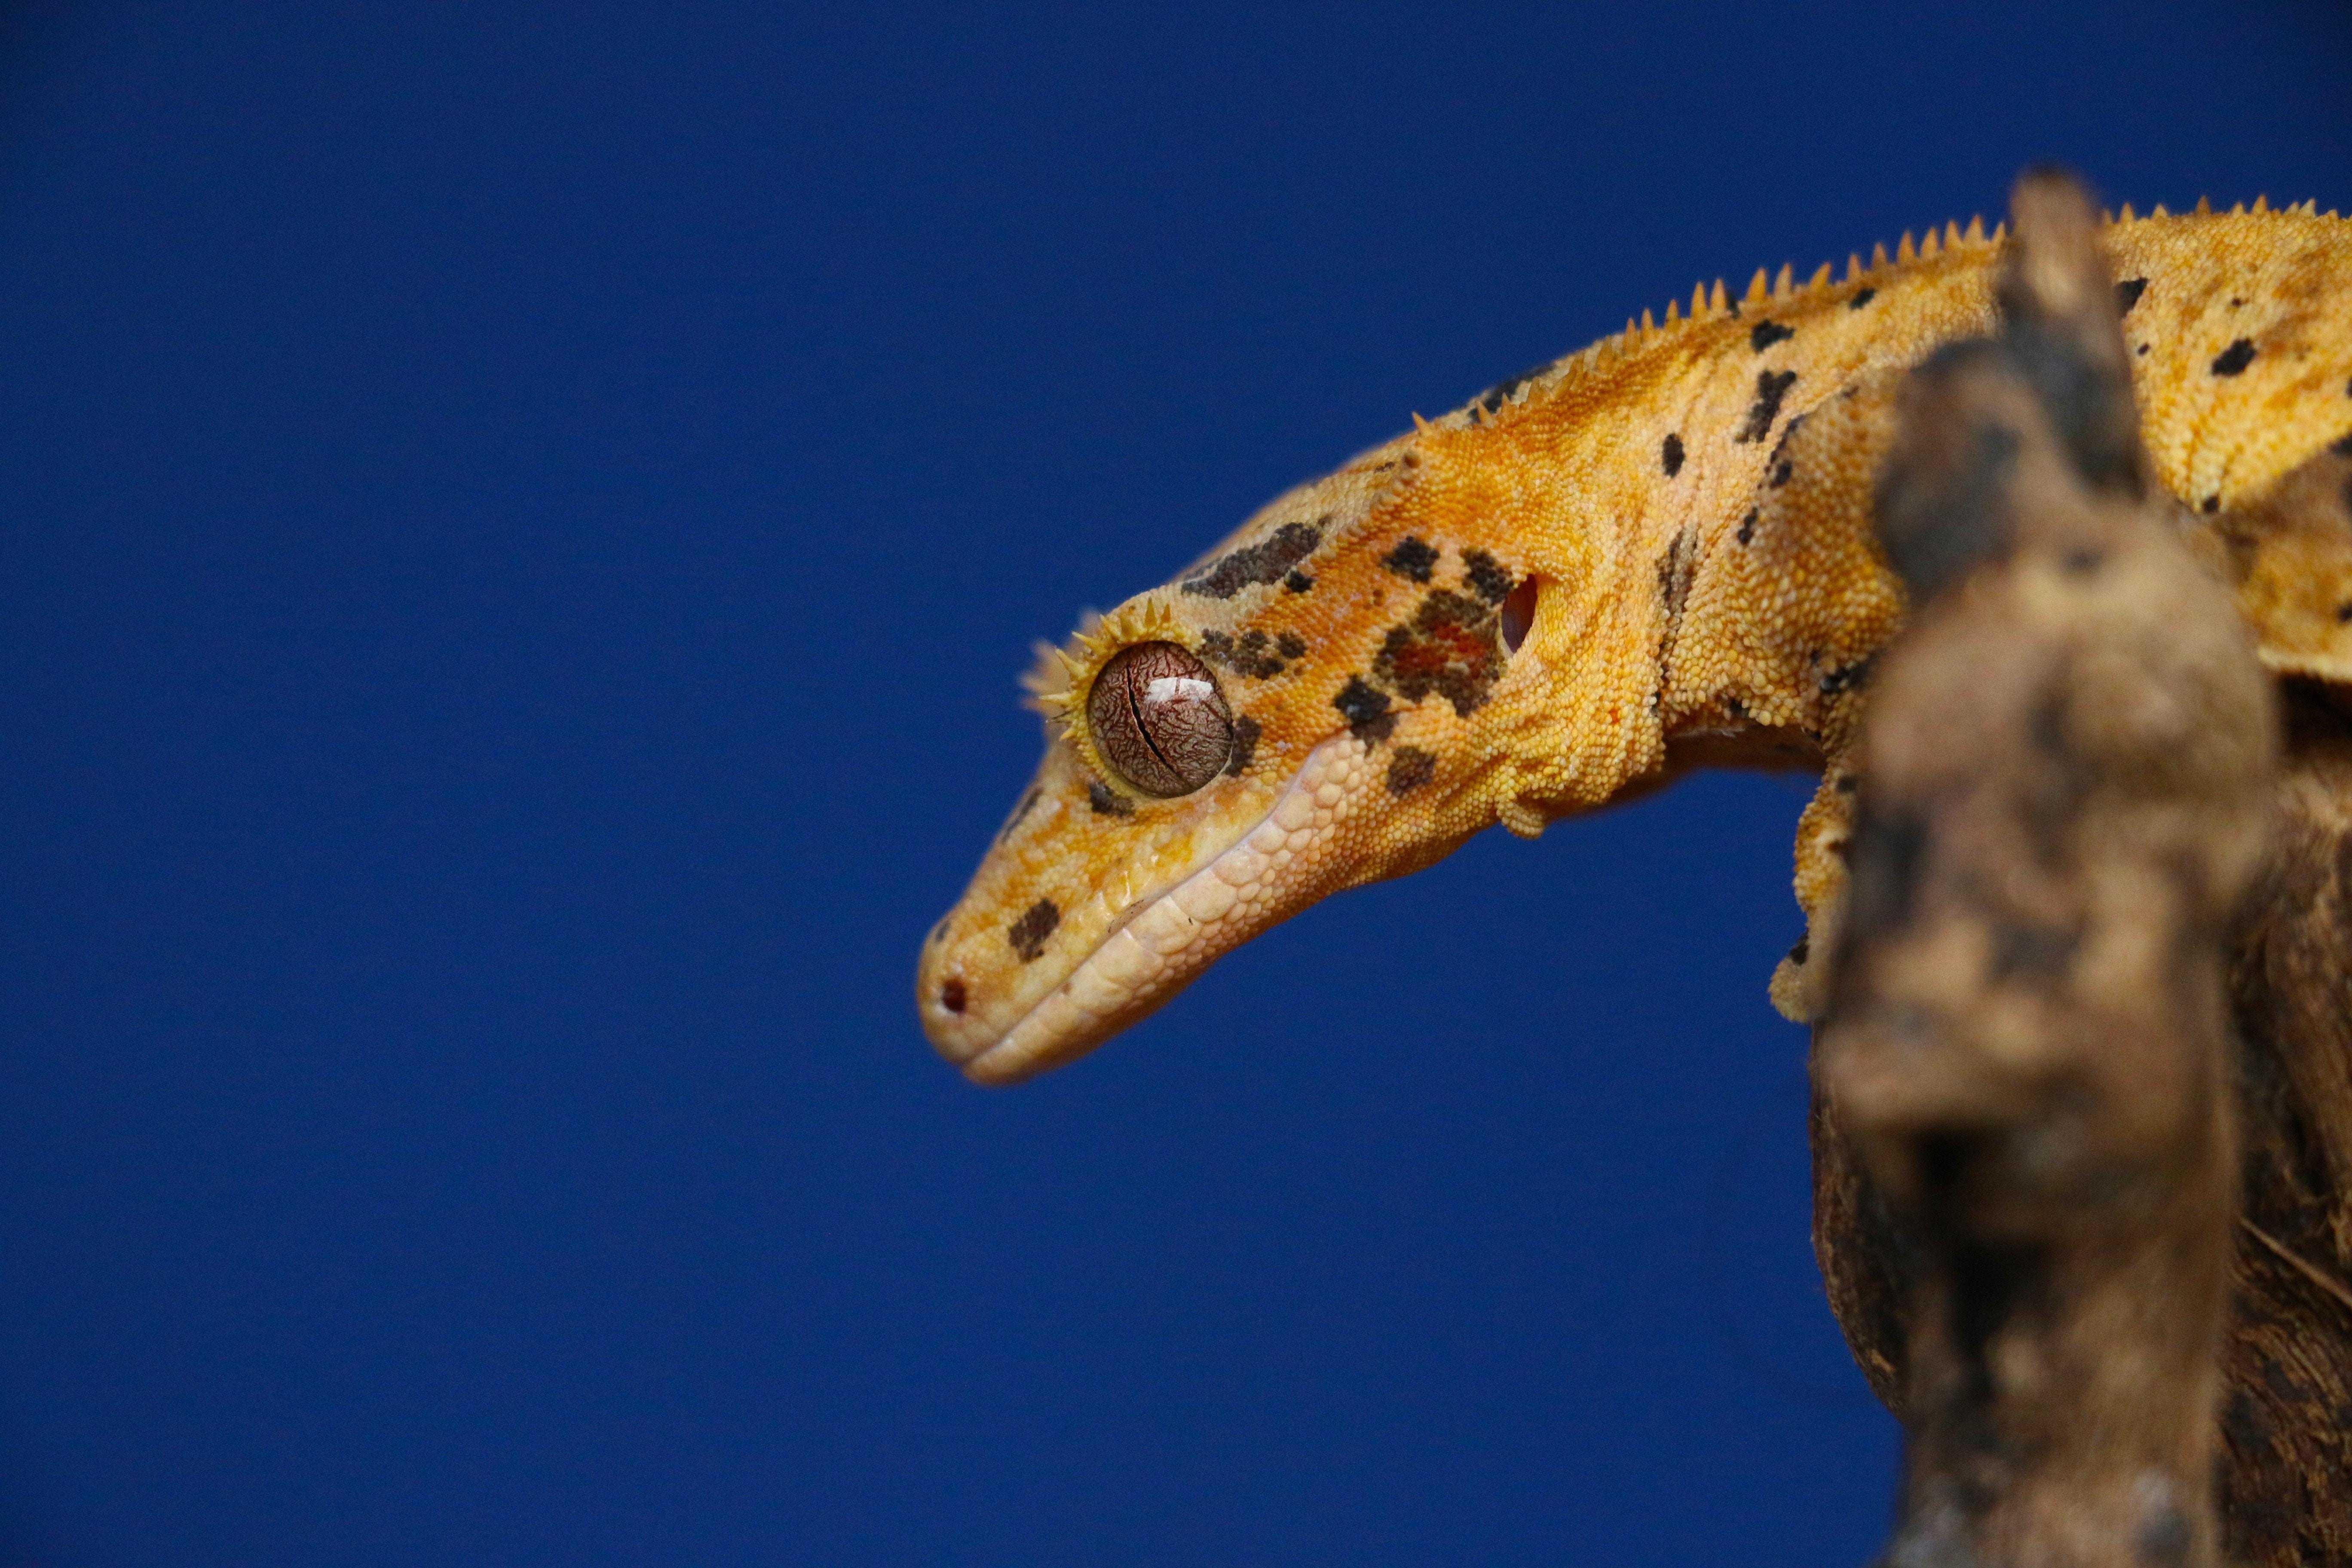 Crested Gecko Picture. Download Free Image